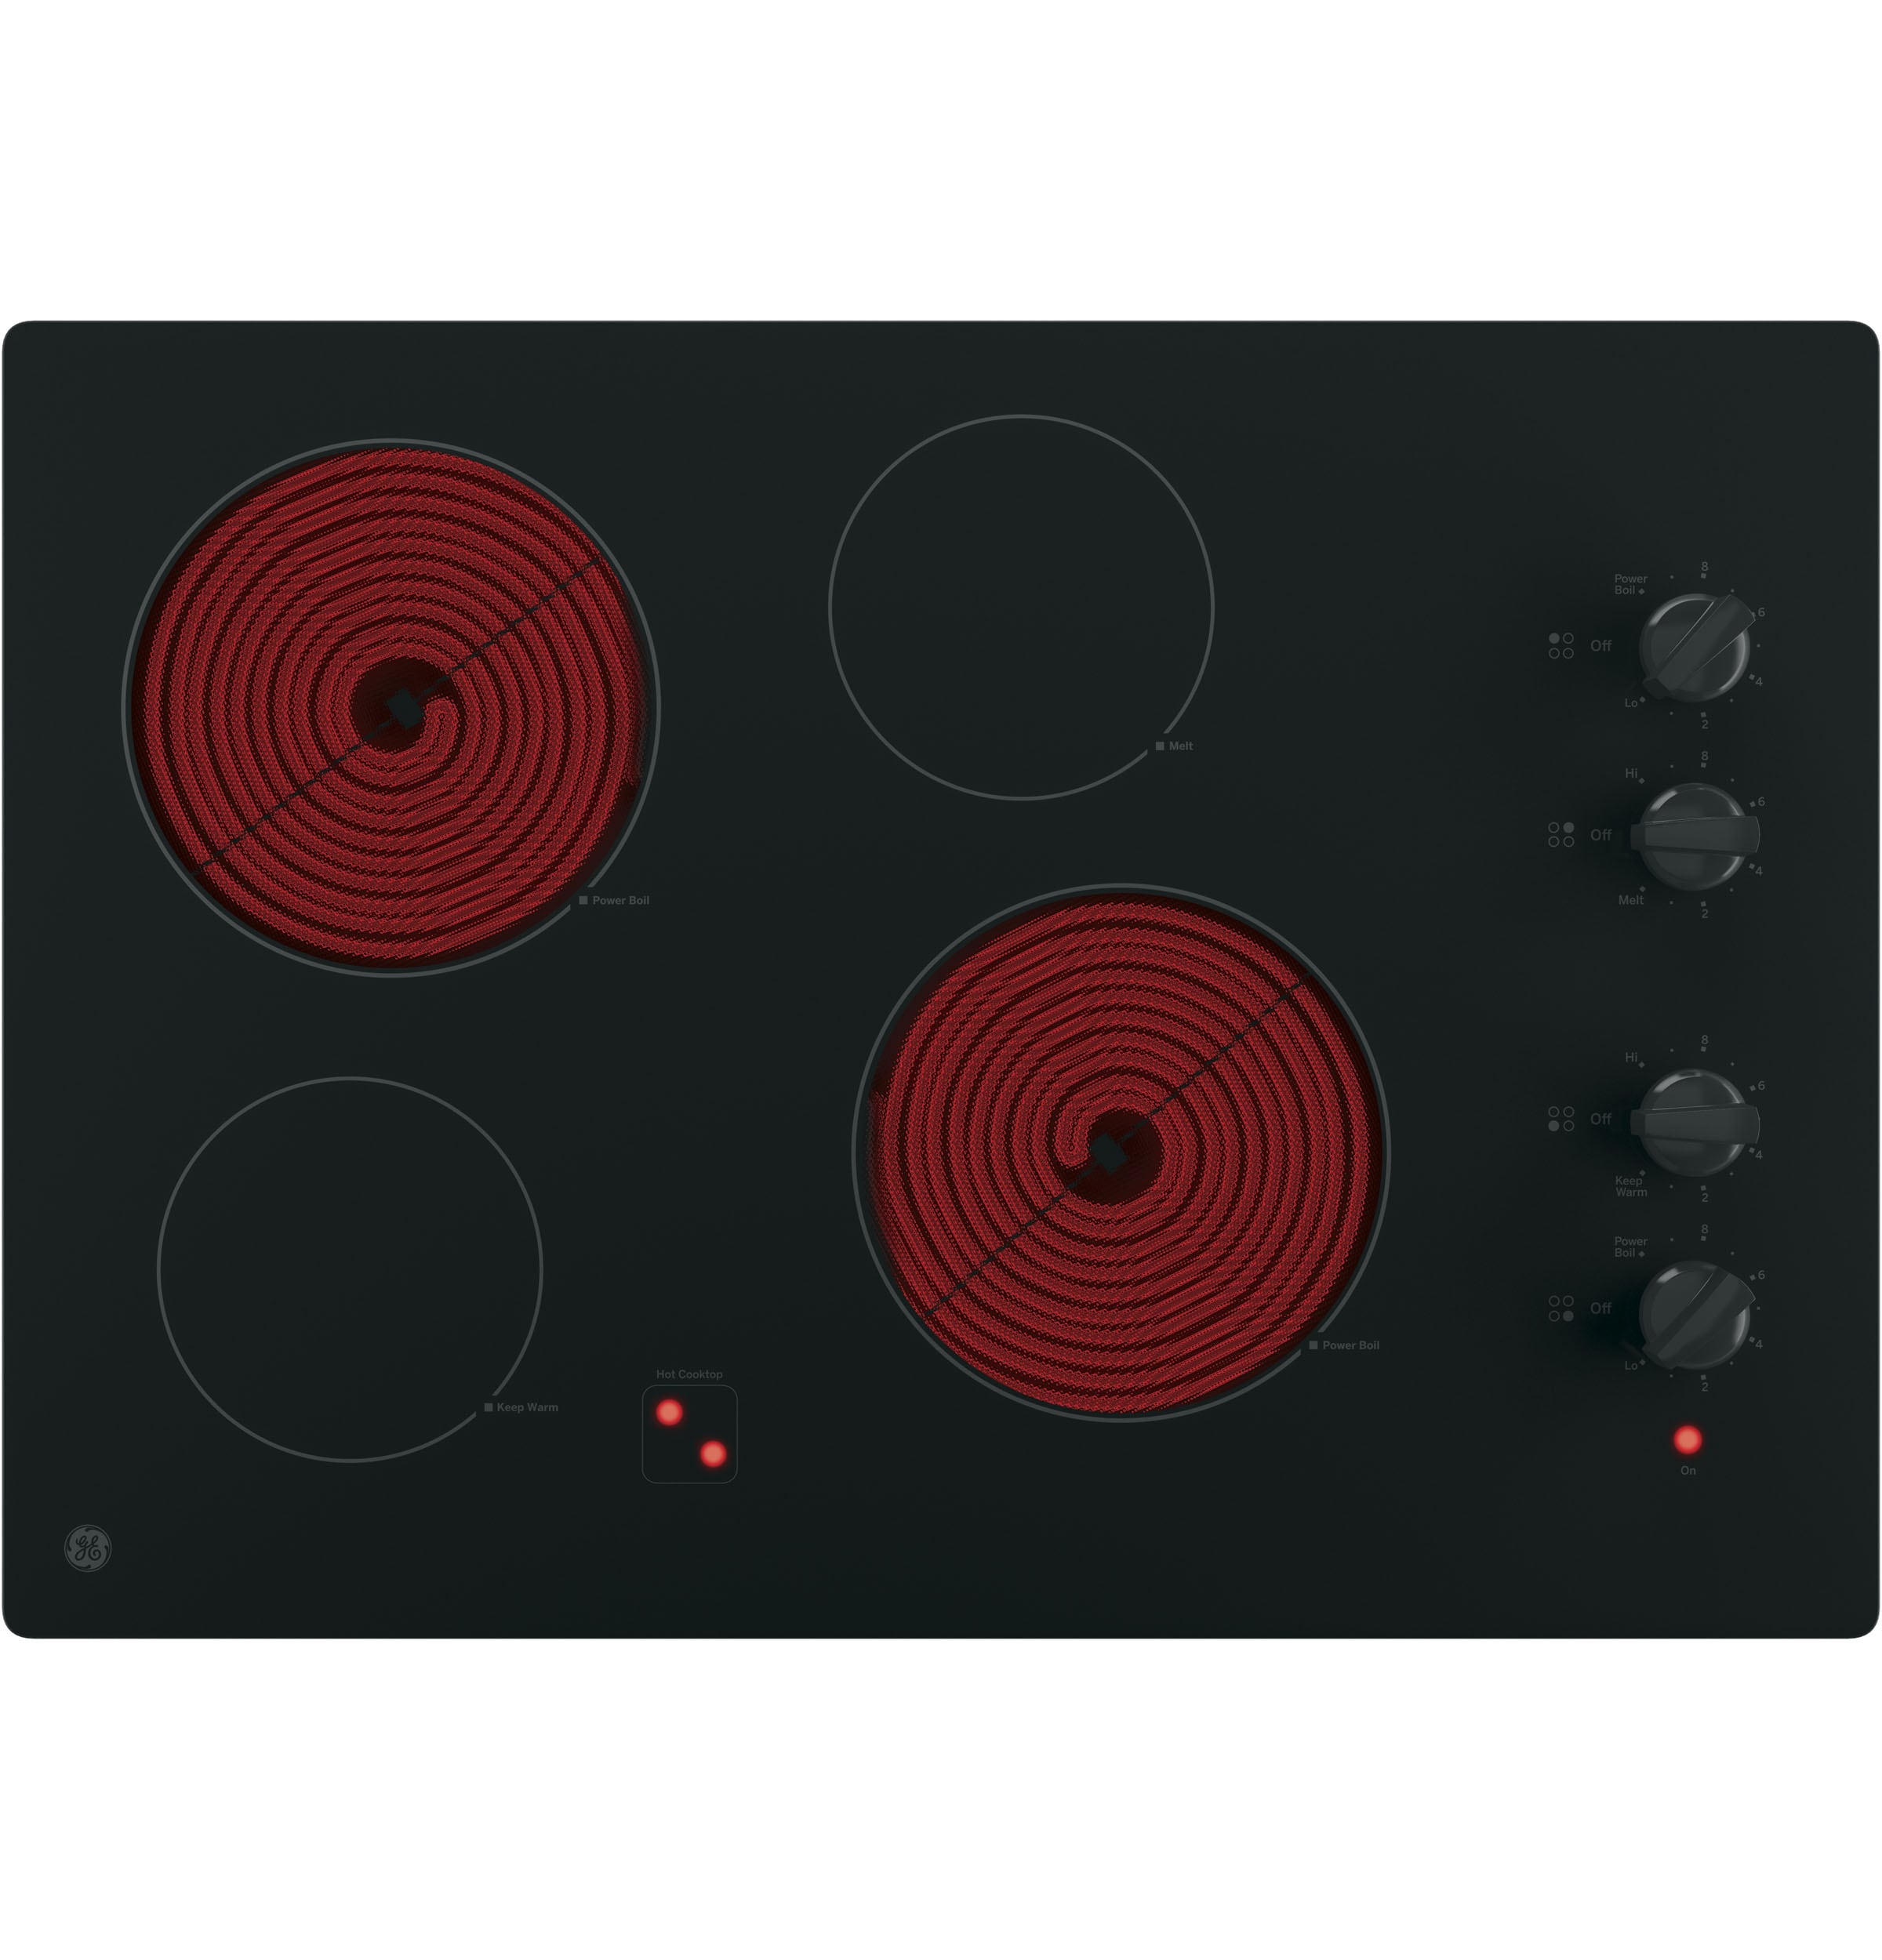 GE 21 in. Radiant Electric Cooktop in Black with 2 Elements JP3021DPBB -  The Home Depot